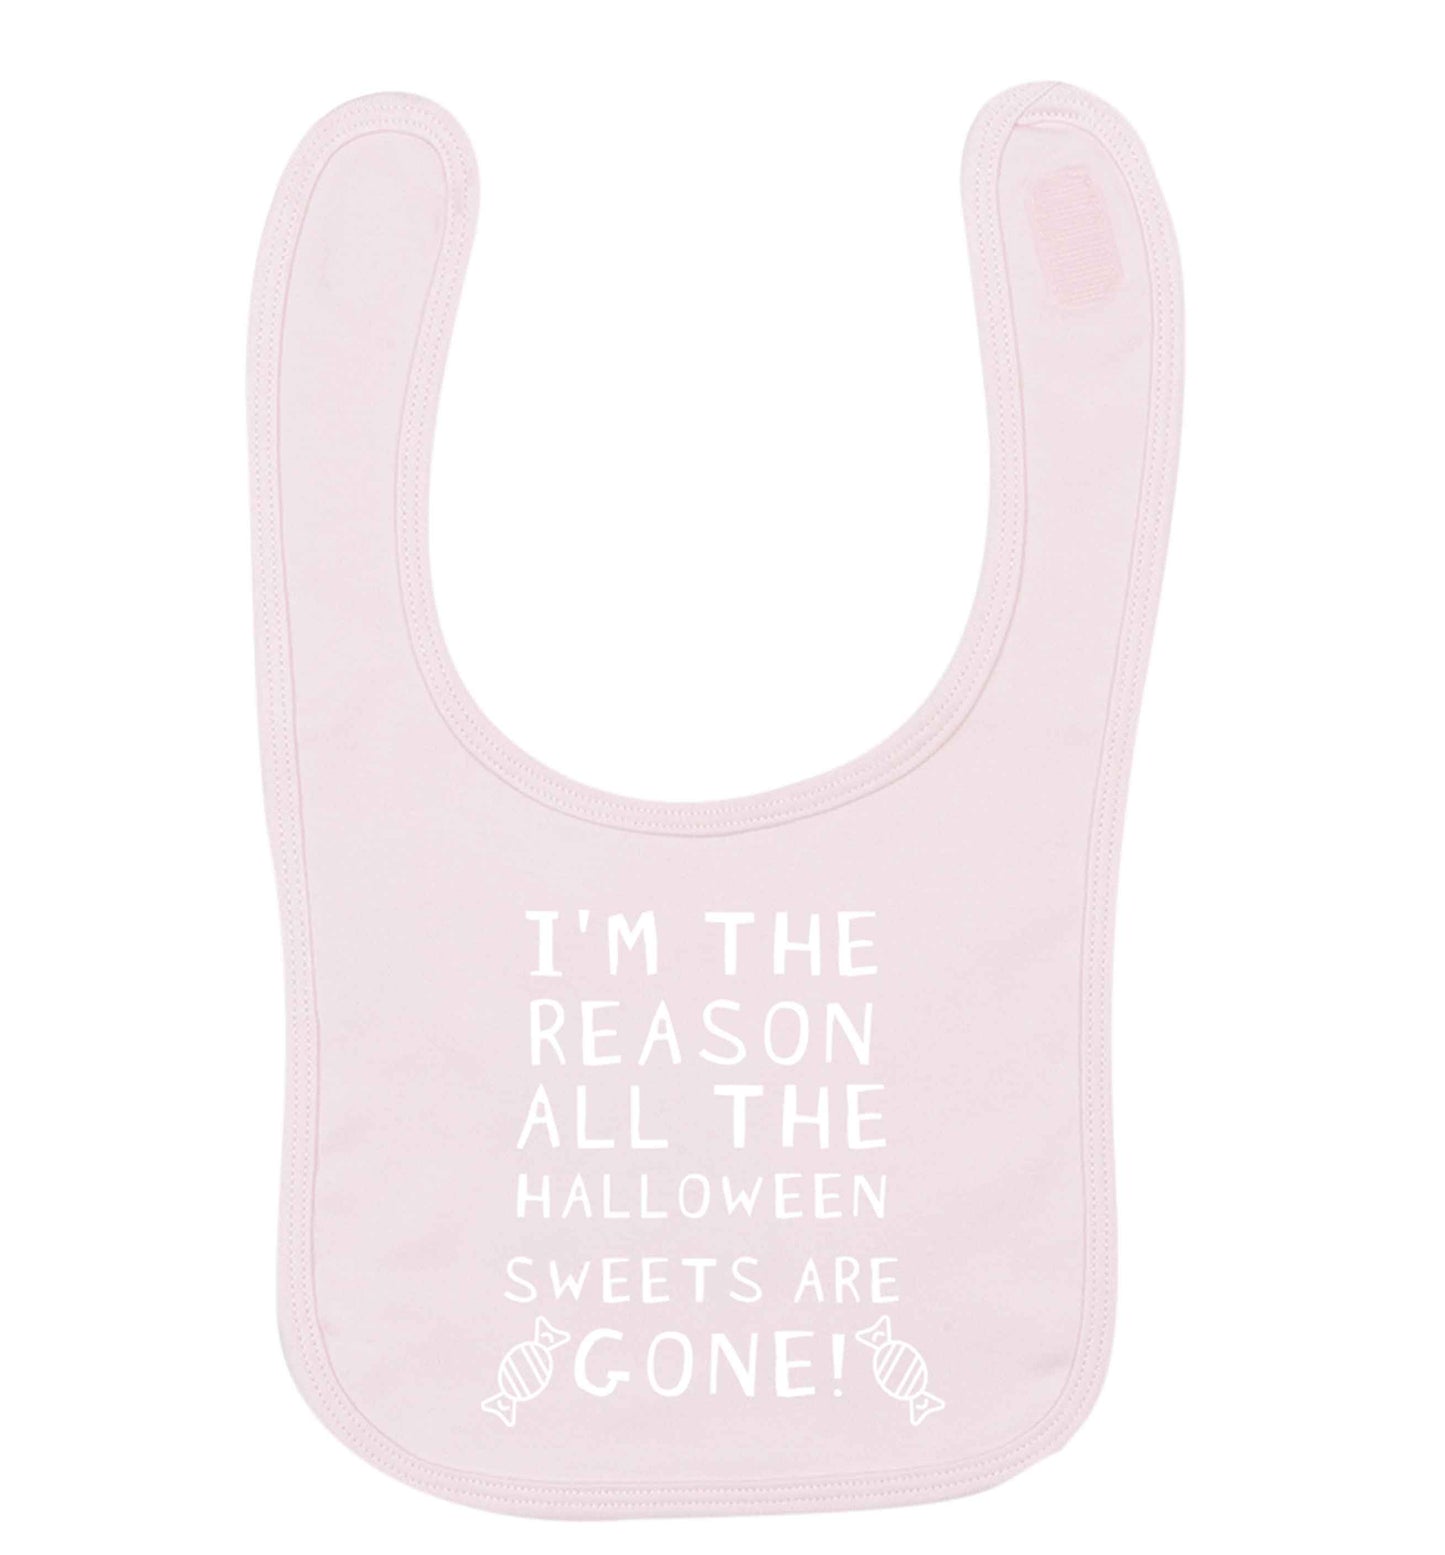 I'm the reason all of the halloween sweets are gone pale pink baby bib